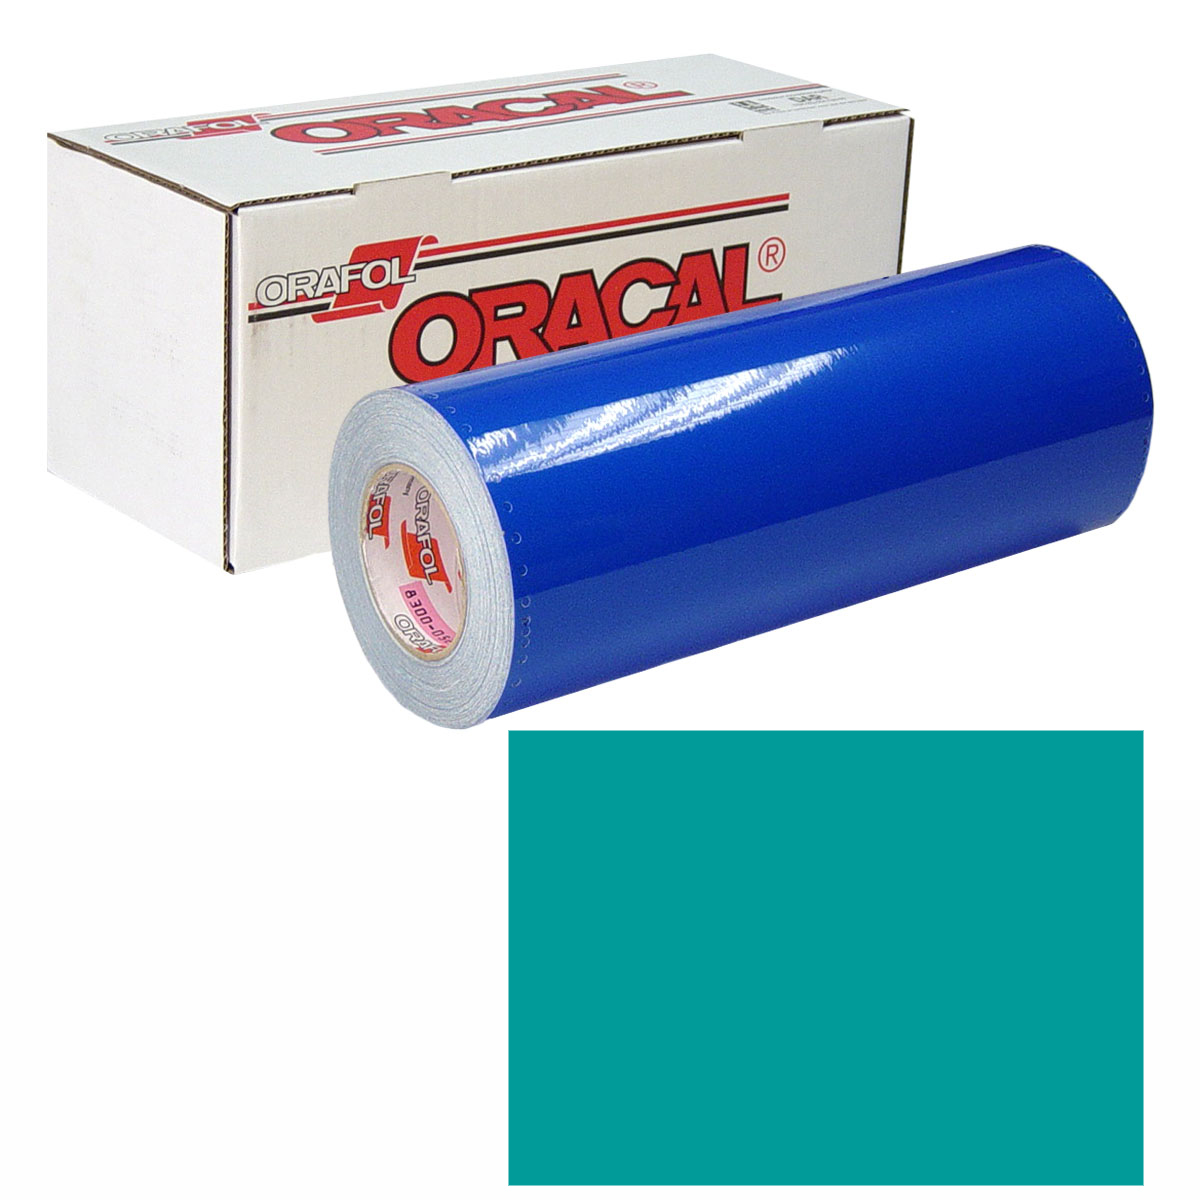 ORACAL 631 15in X 10yd 054 Turquoise